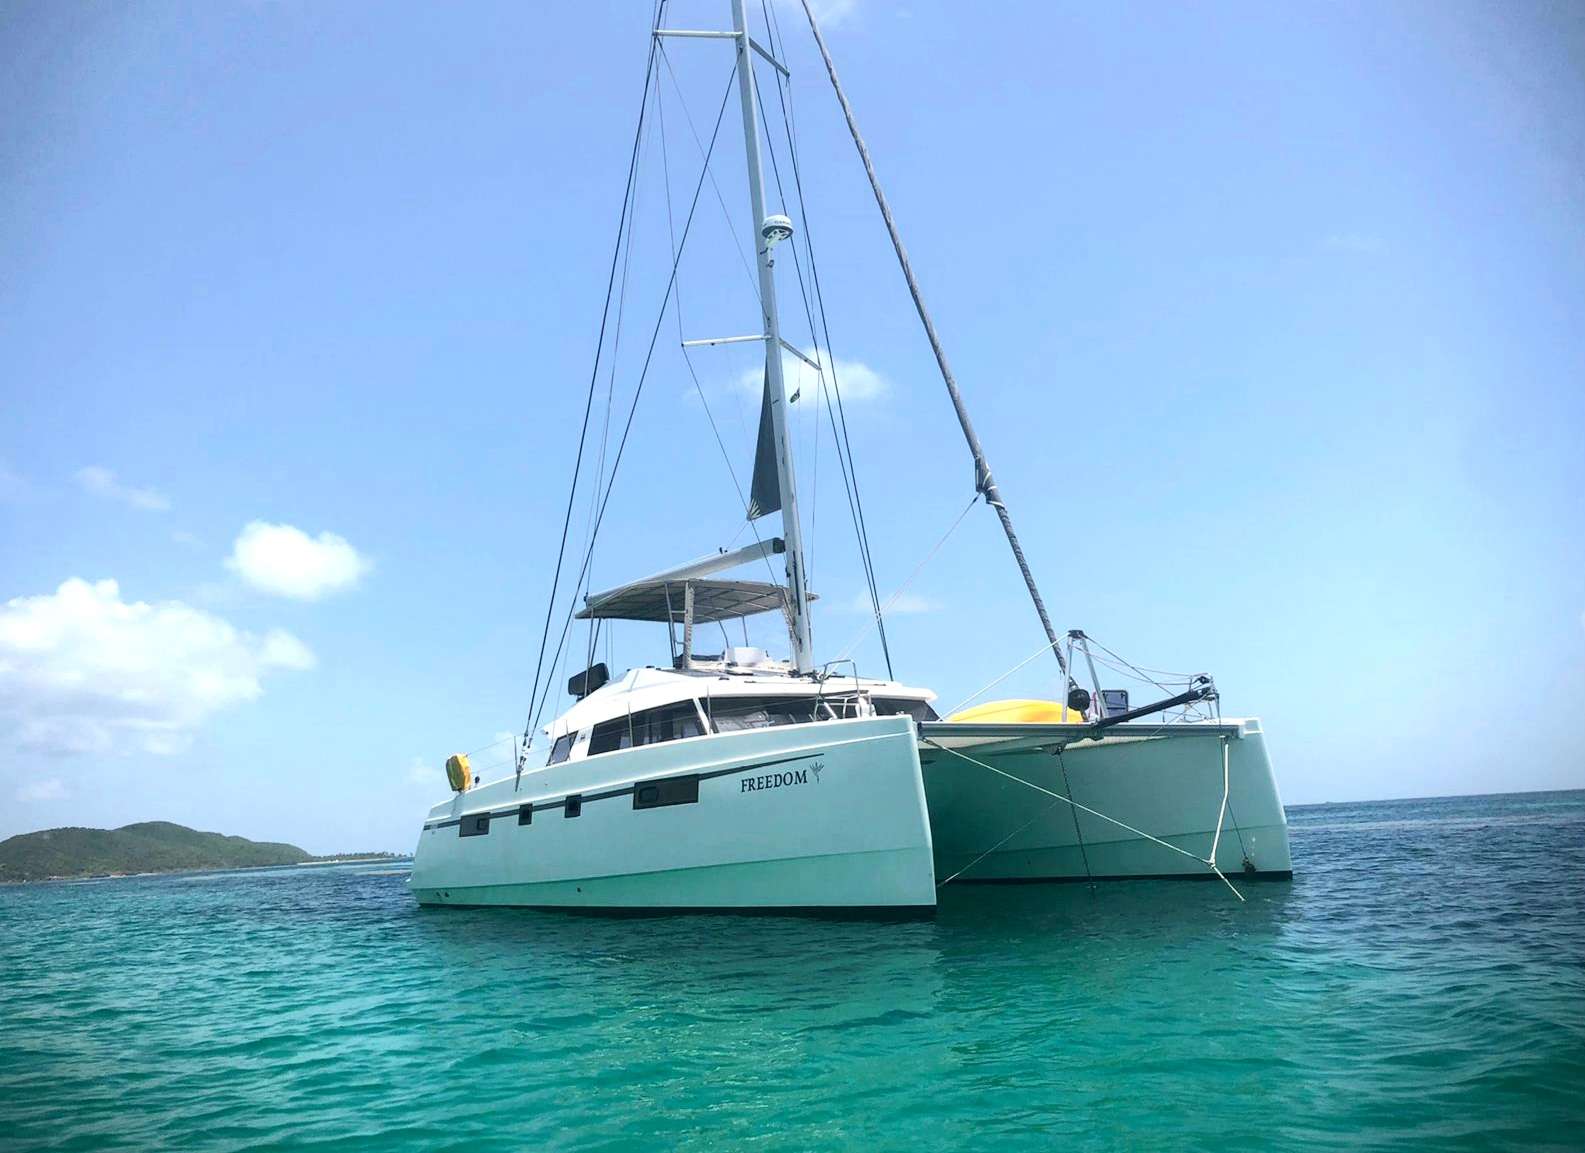 Freedom - Yacht Charter Saint Vincent and the Grenadines & Boat hire in Caribbean 1